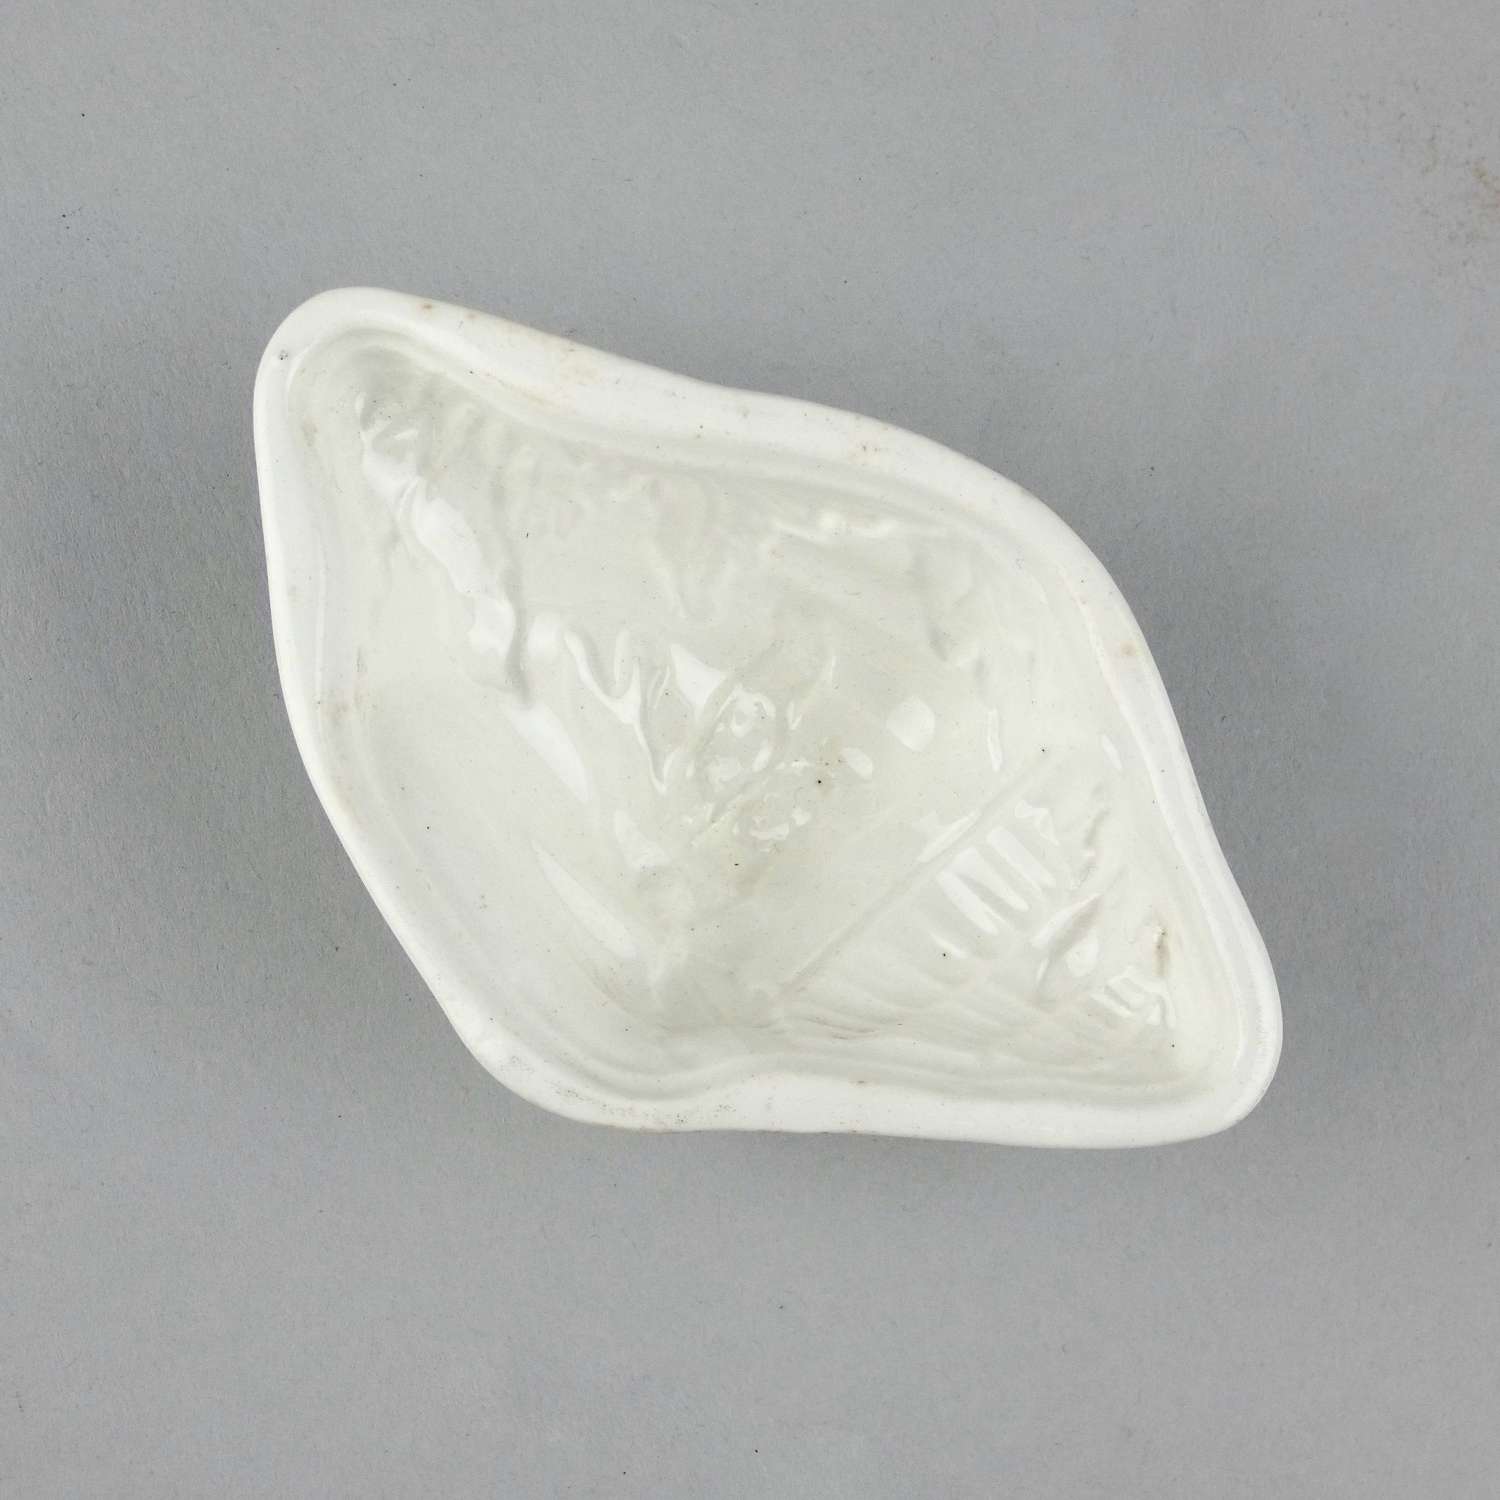 Ironstone 'Conch Shell' mould